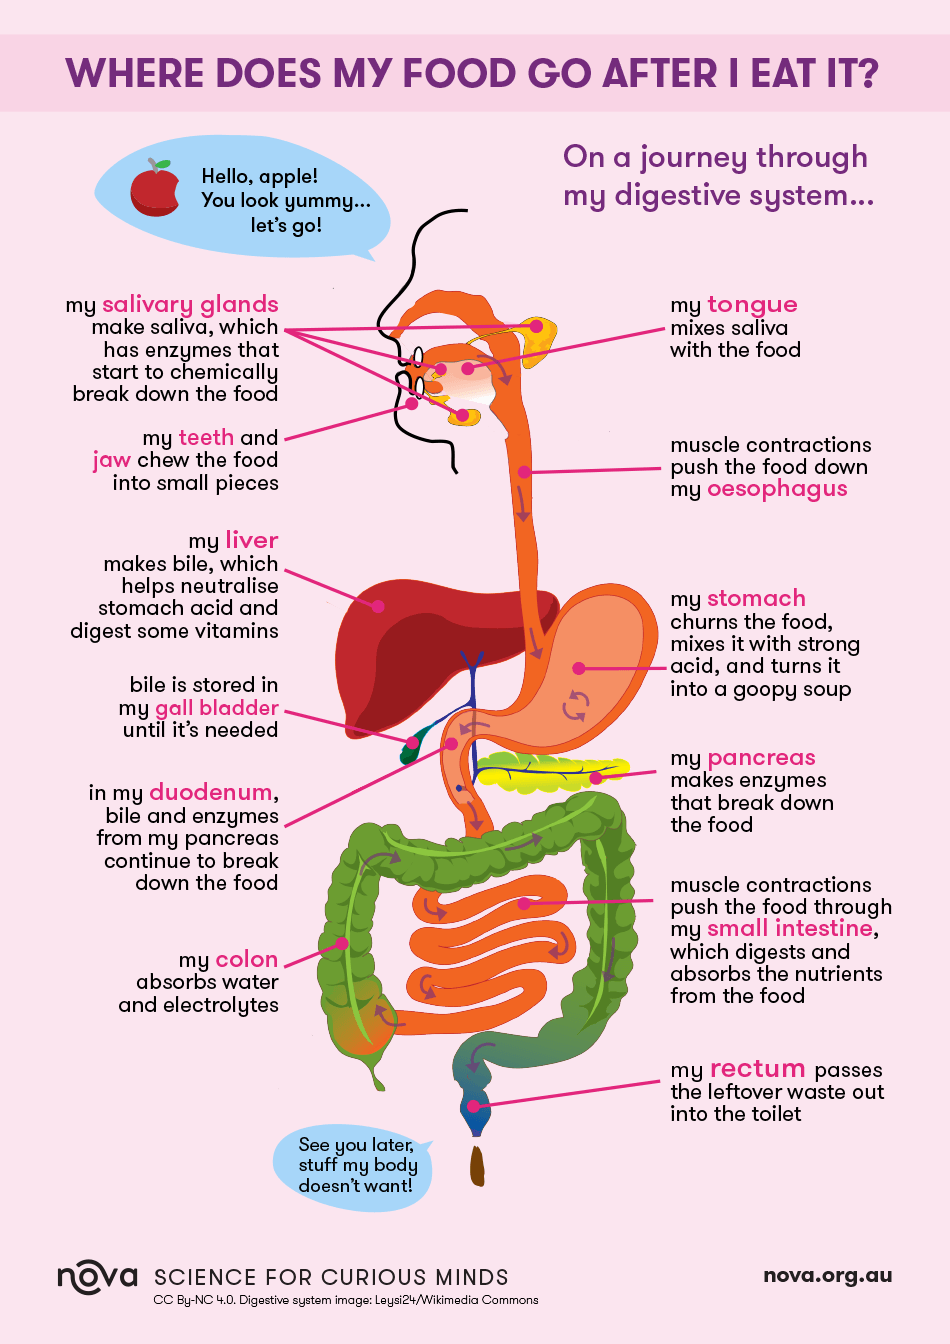 how far does food travel through the body